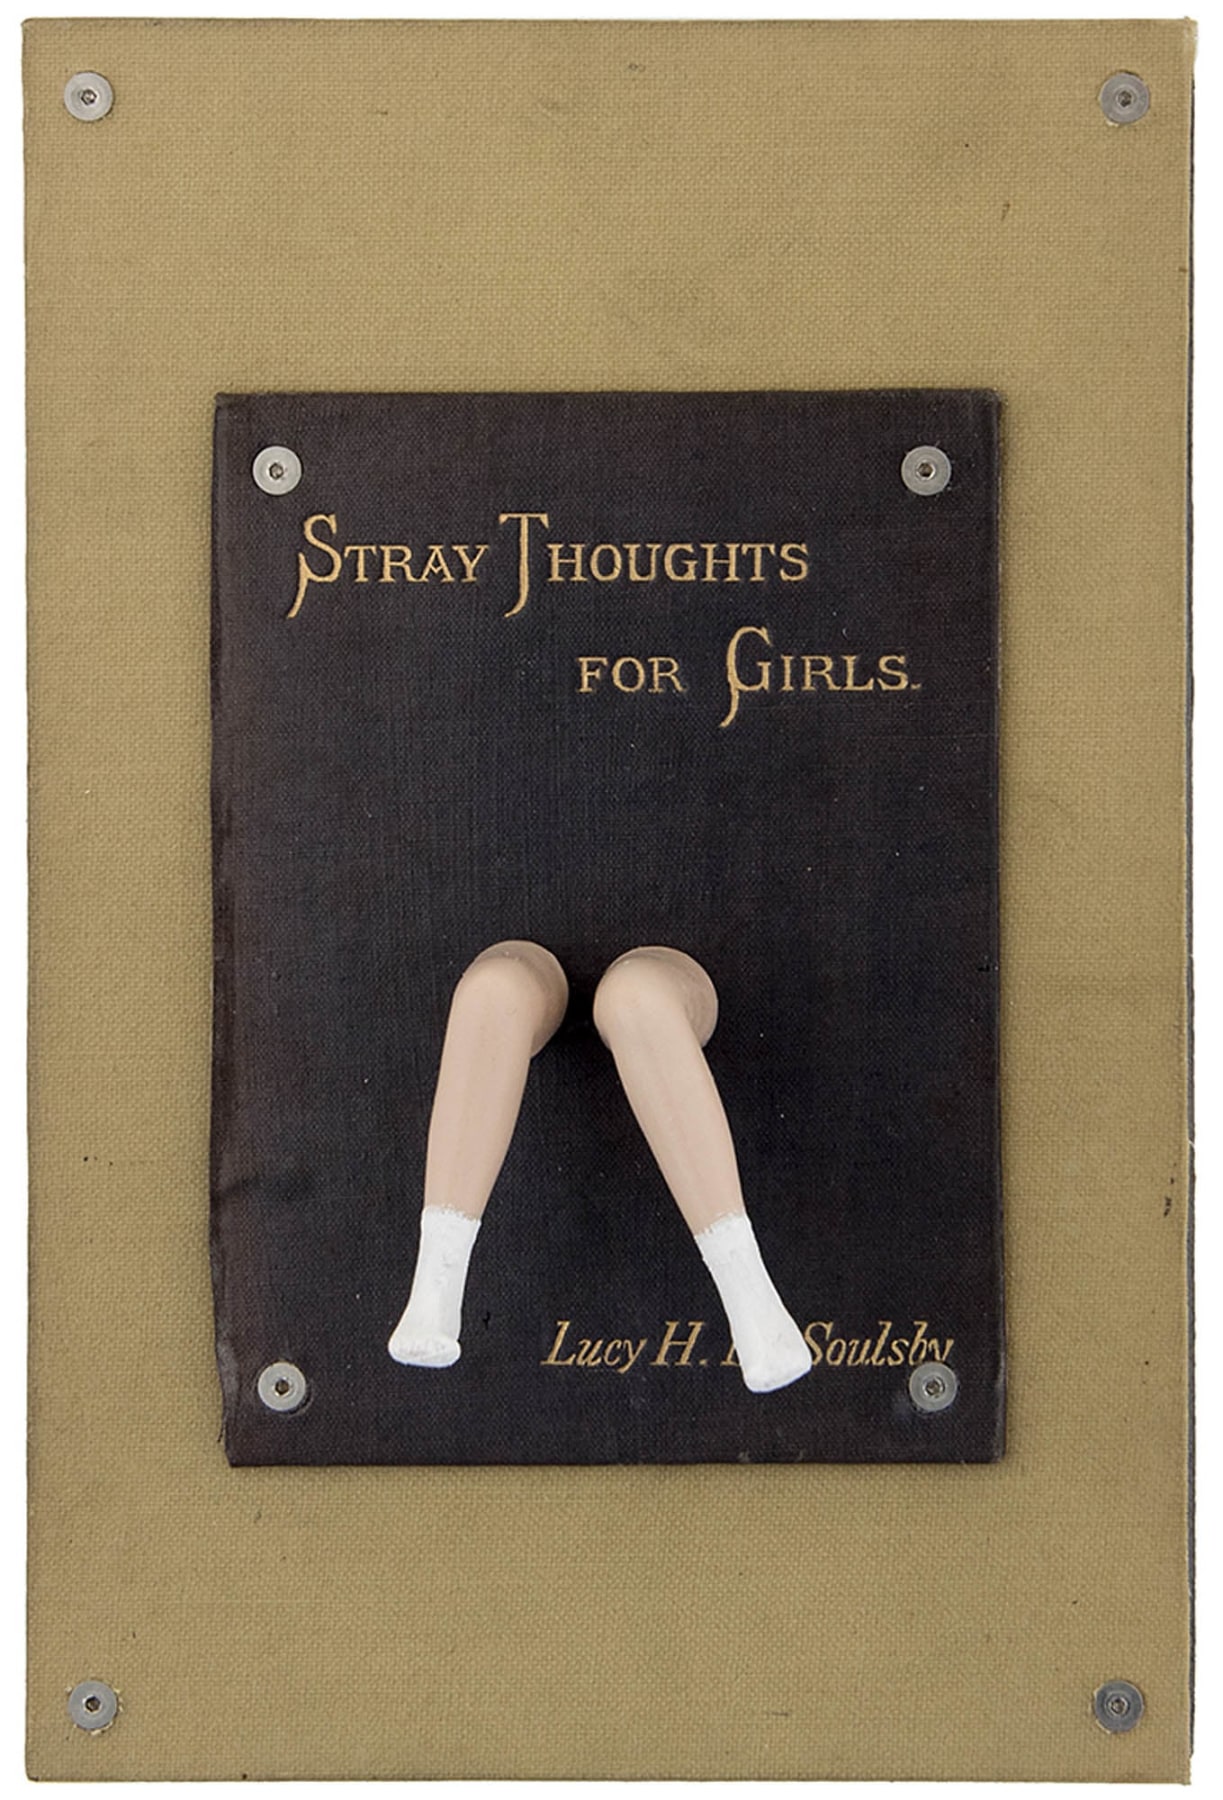 Nancy Gifford, Stray Thoughts for Girls - #metoo Series, 2017